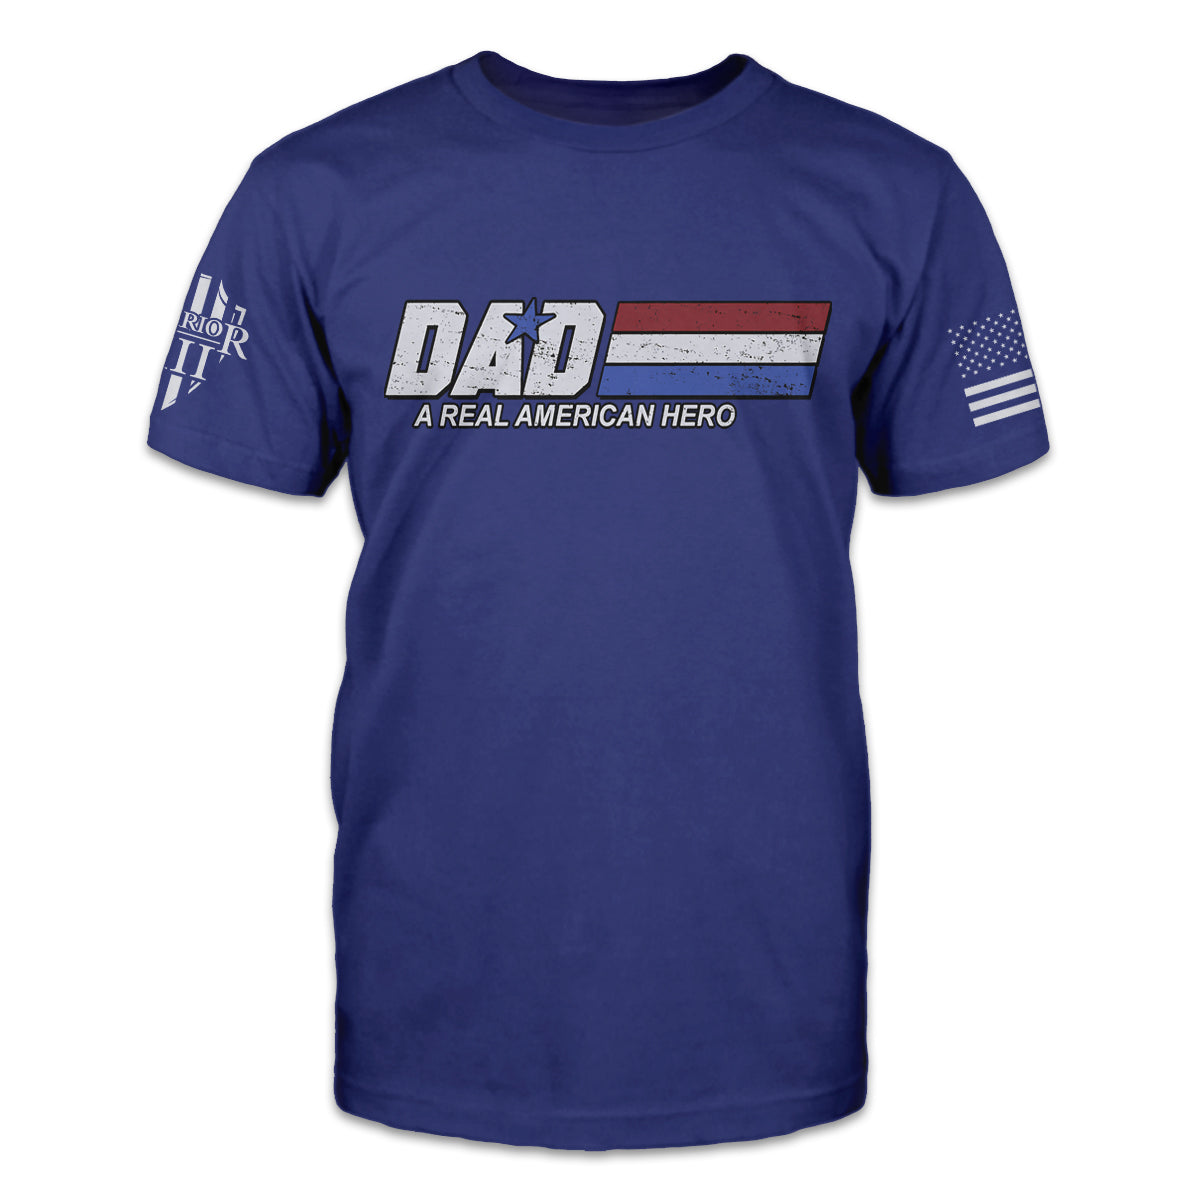 A blue t-shirt with the words "Dad: A Real American Hero" printed on the front.